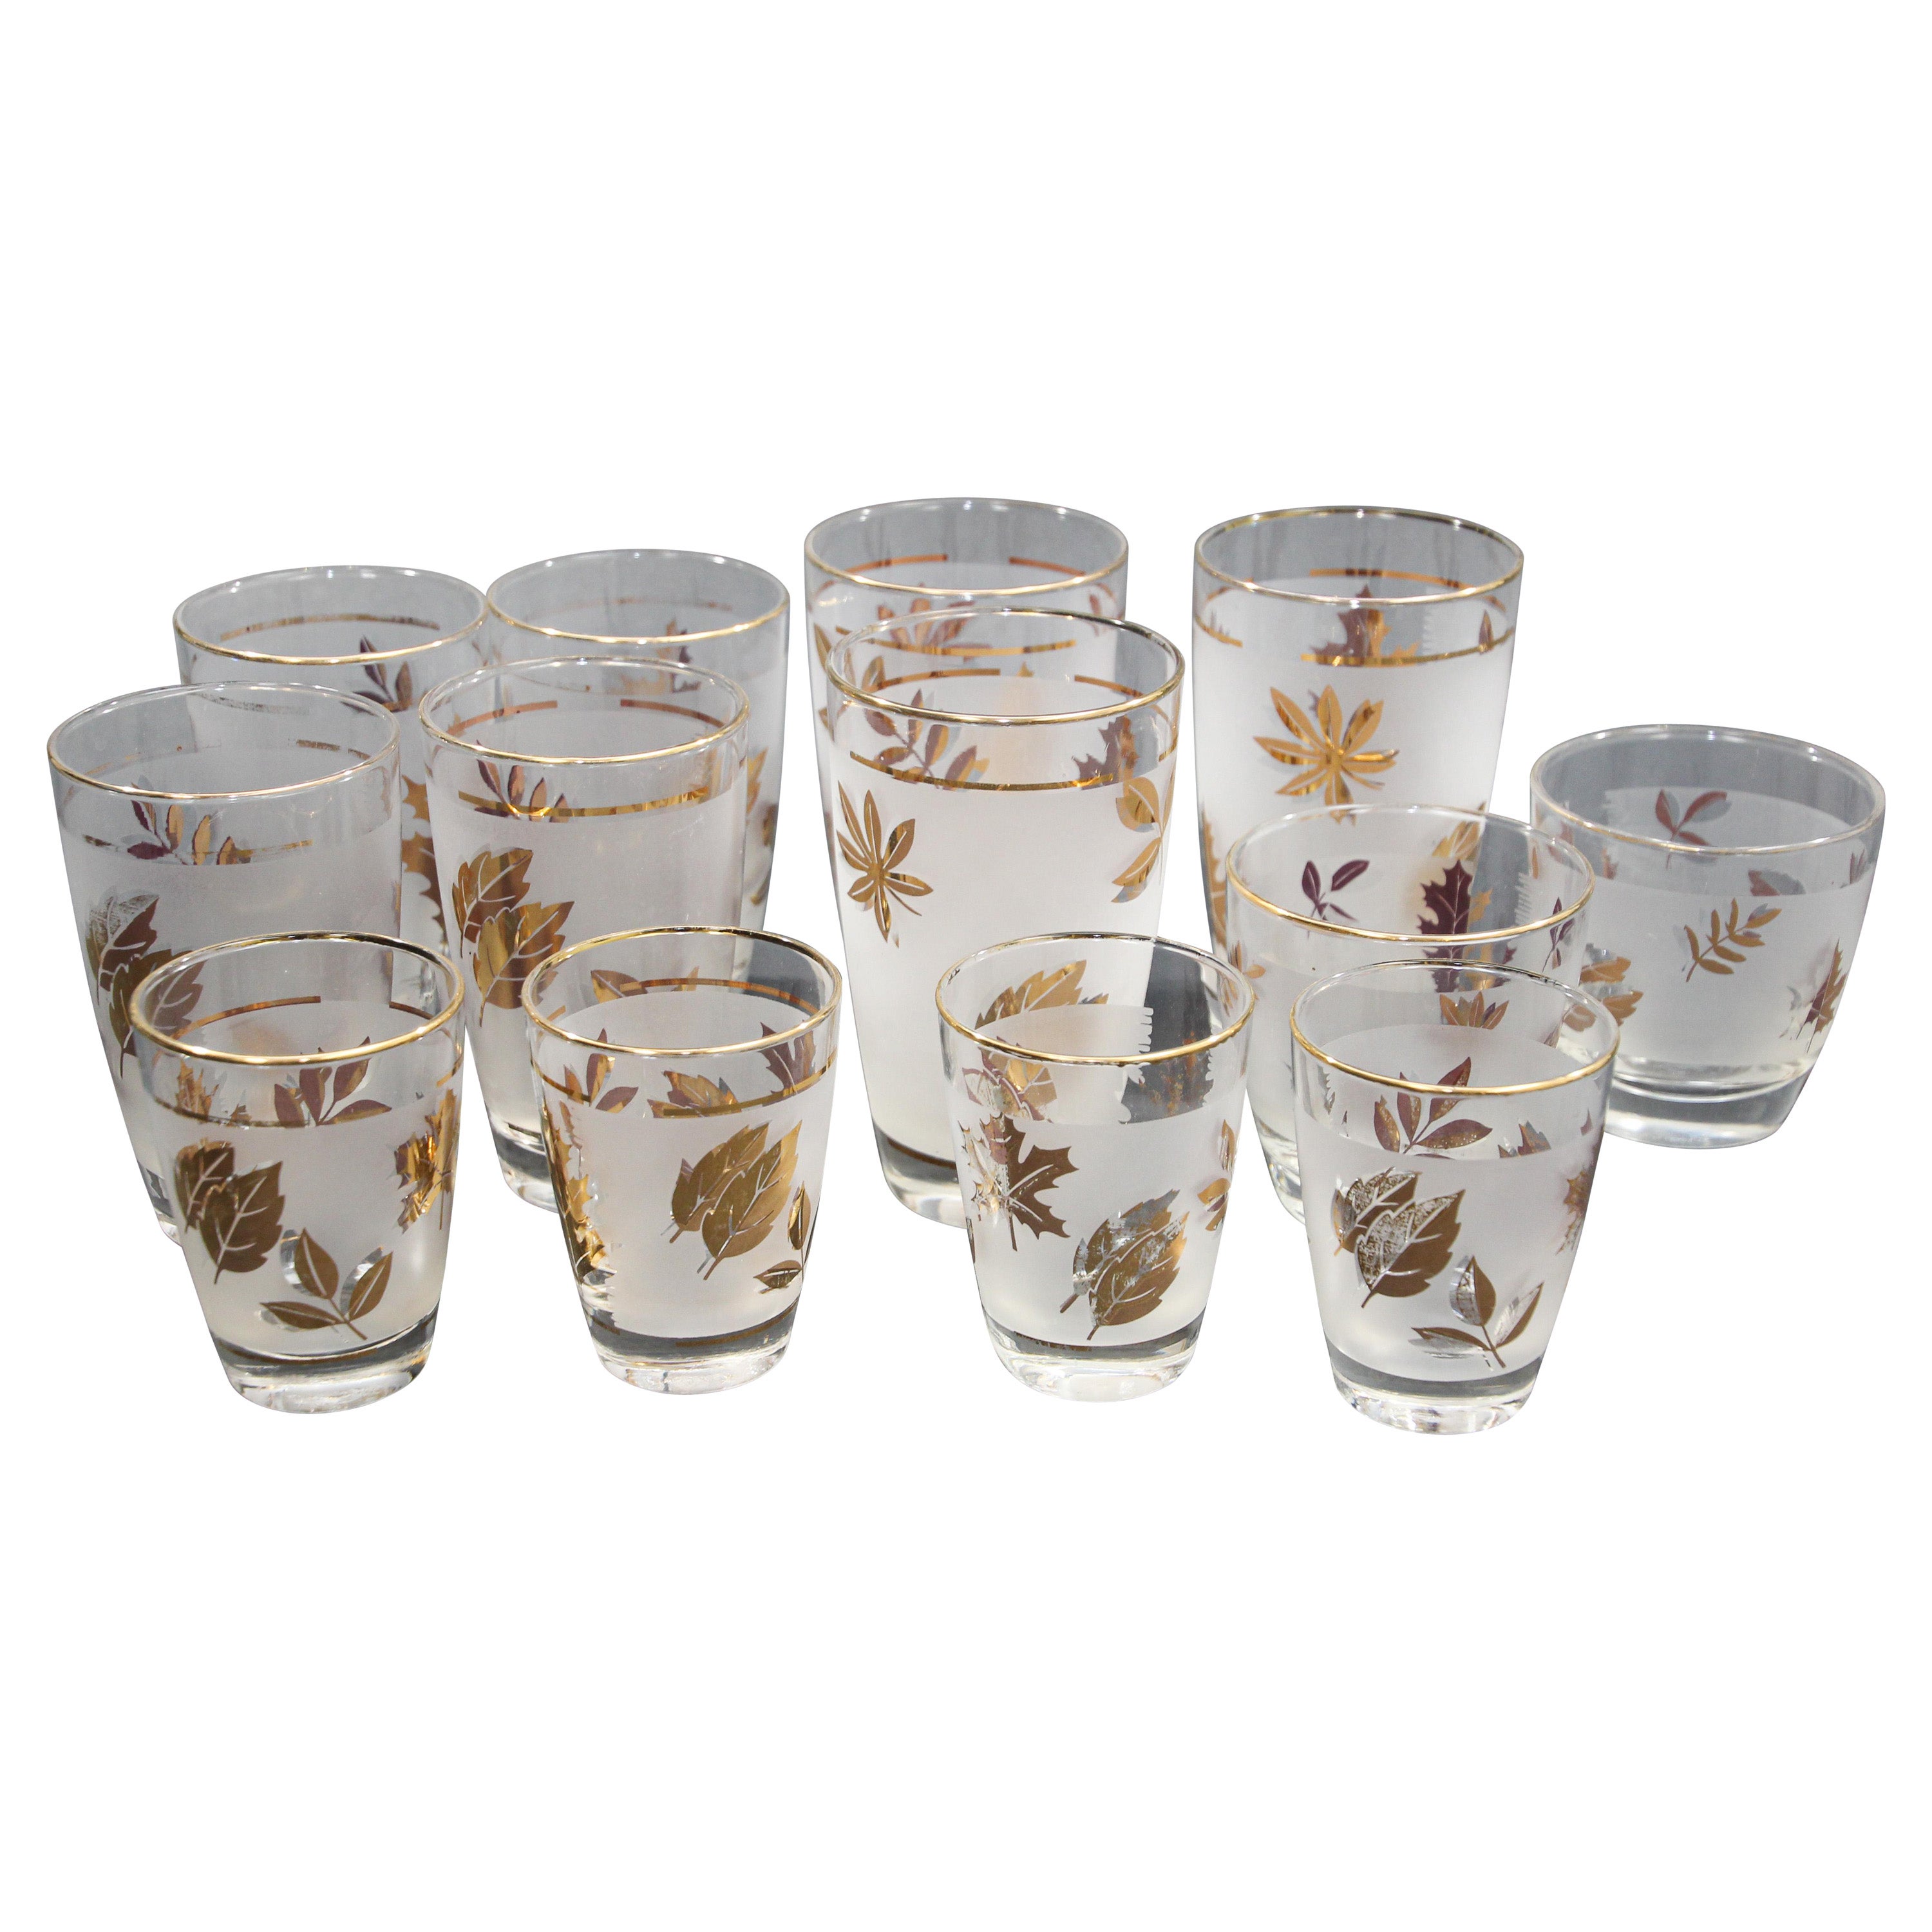 Tom Collins Great gift for him! Vintage glasses Golden Foliage by Libbey Pilsner originally 6 glasses of mcm barware but gin and tonic